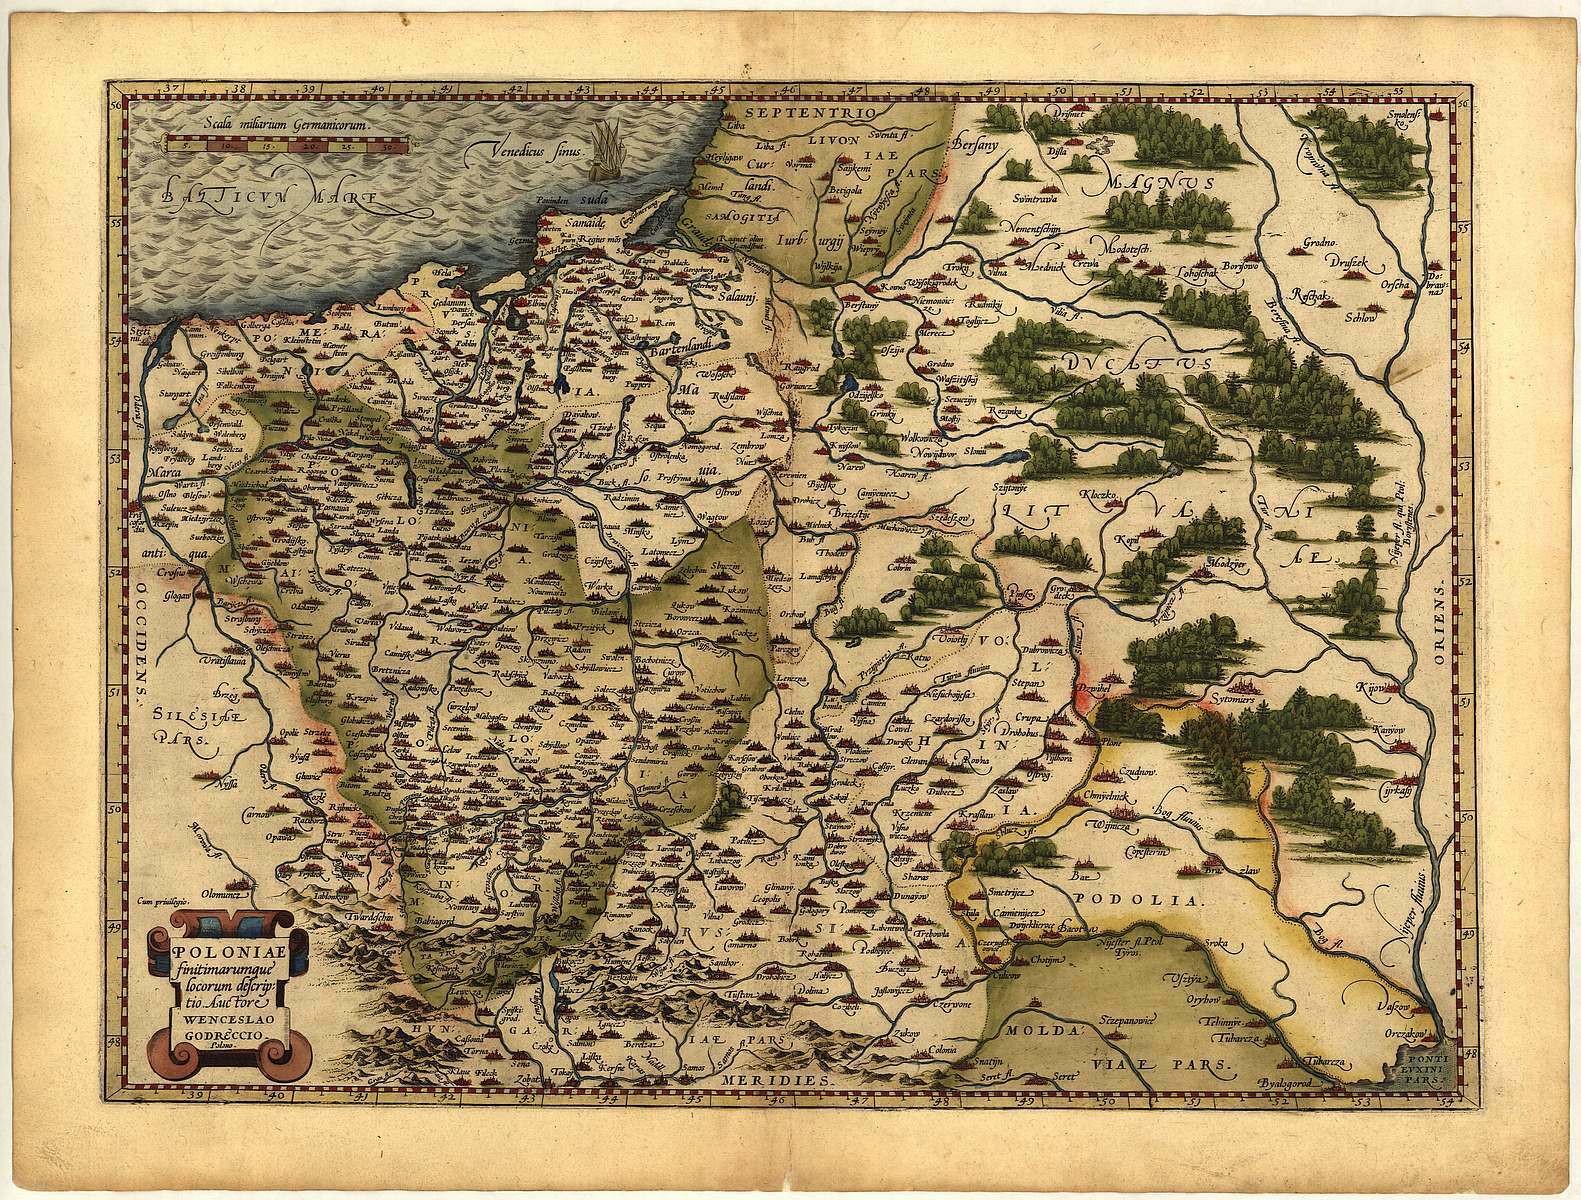 A1 Colour Poland, Lithuania West Russia Reproduction Ortelius Old Antique Map